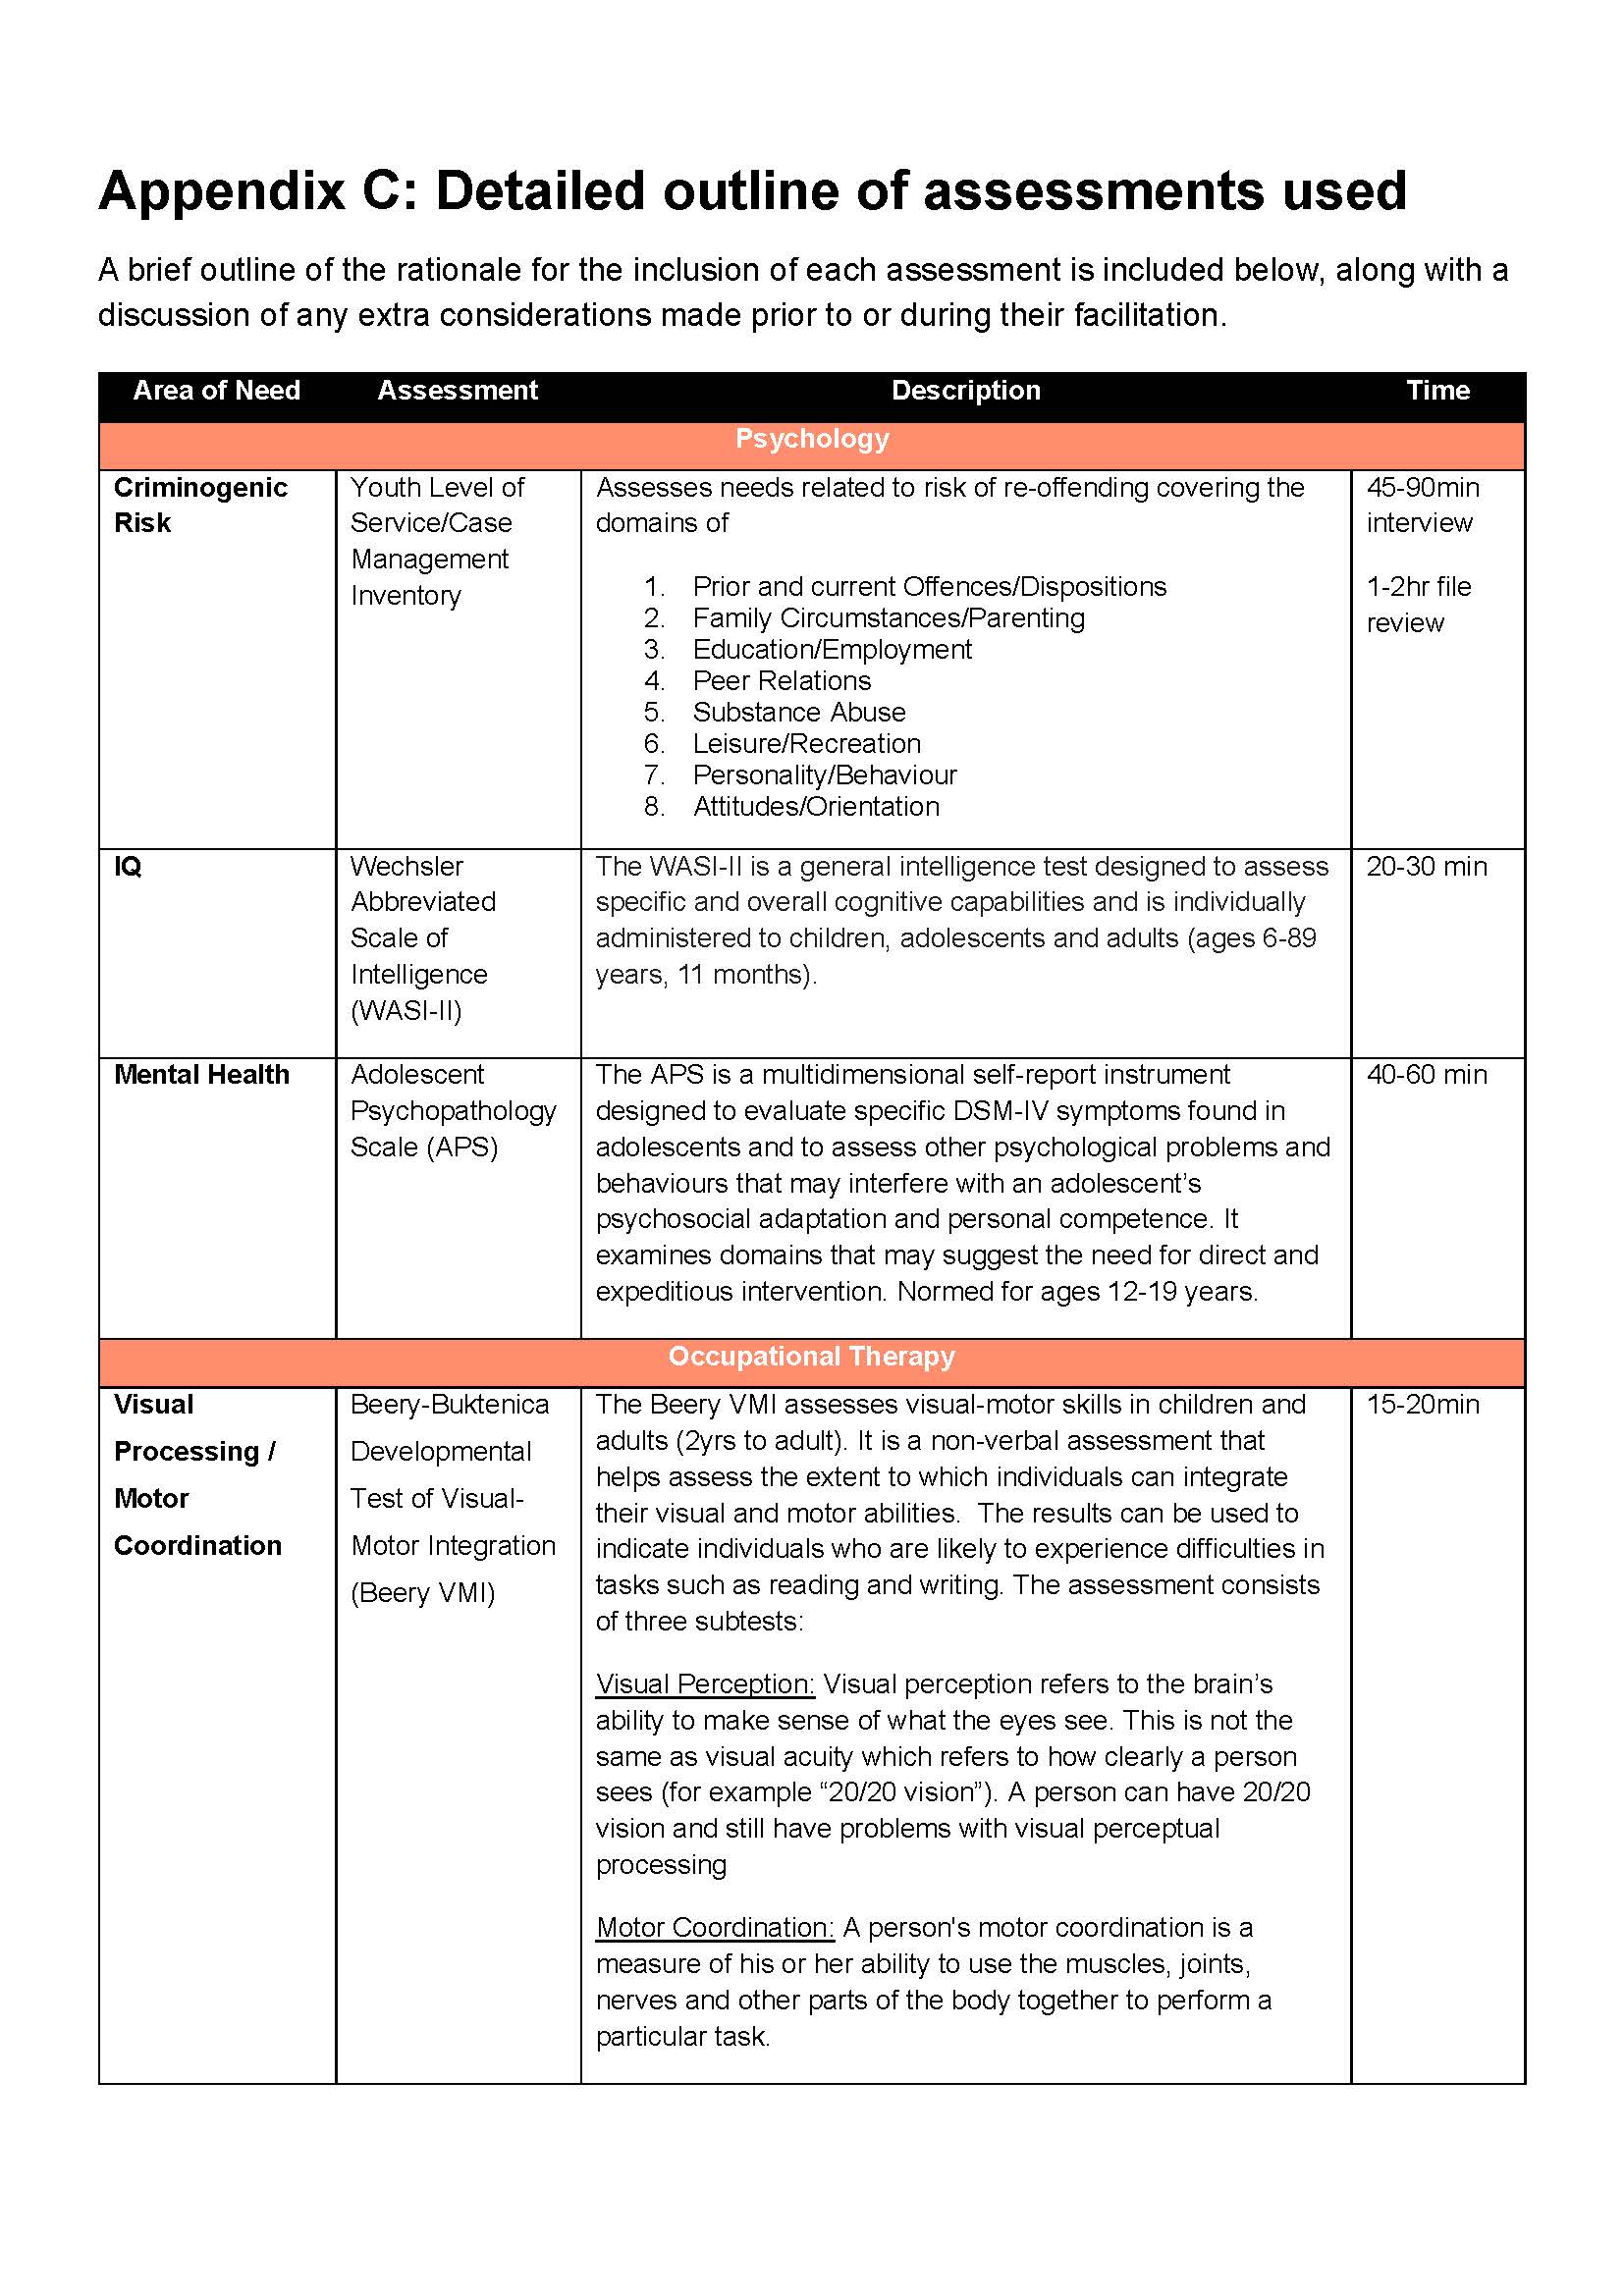 Detailed outline of assessments used. This form has three pages: a description of the area of need, the method of assessment, and the time allowed. For example, an assessment of mental health assessed via the adolescent psycho-pathology scale, which takes around 60 minutes.